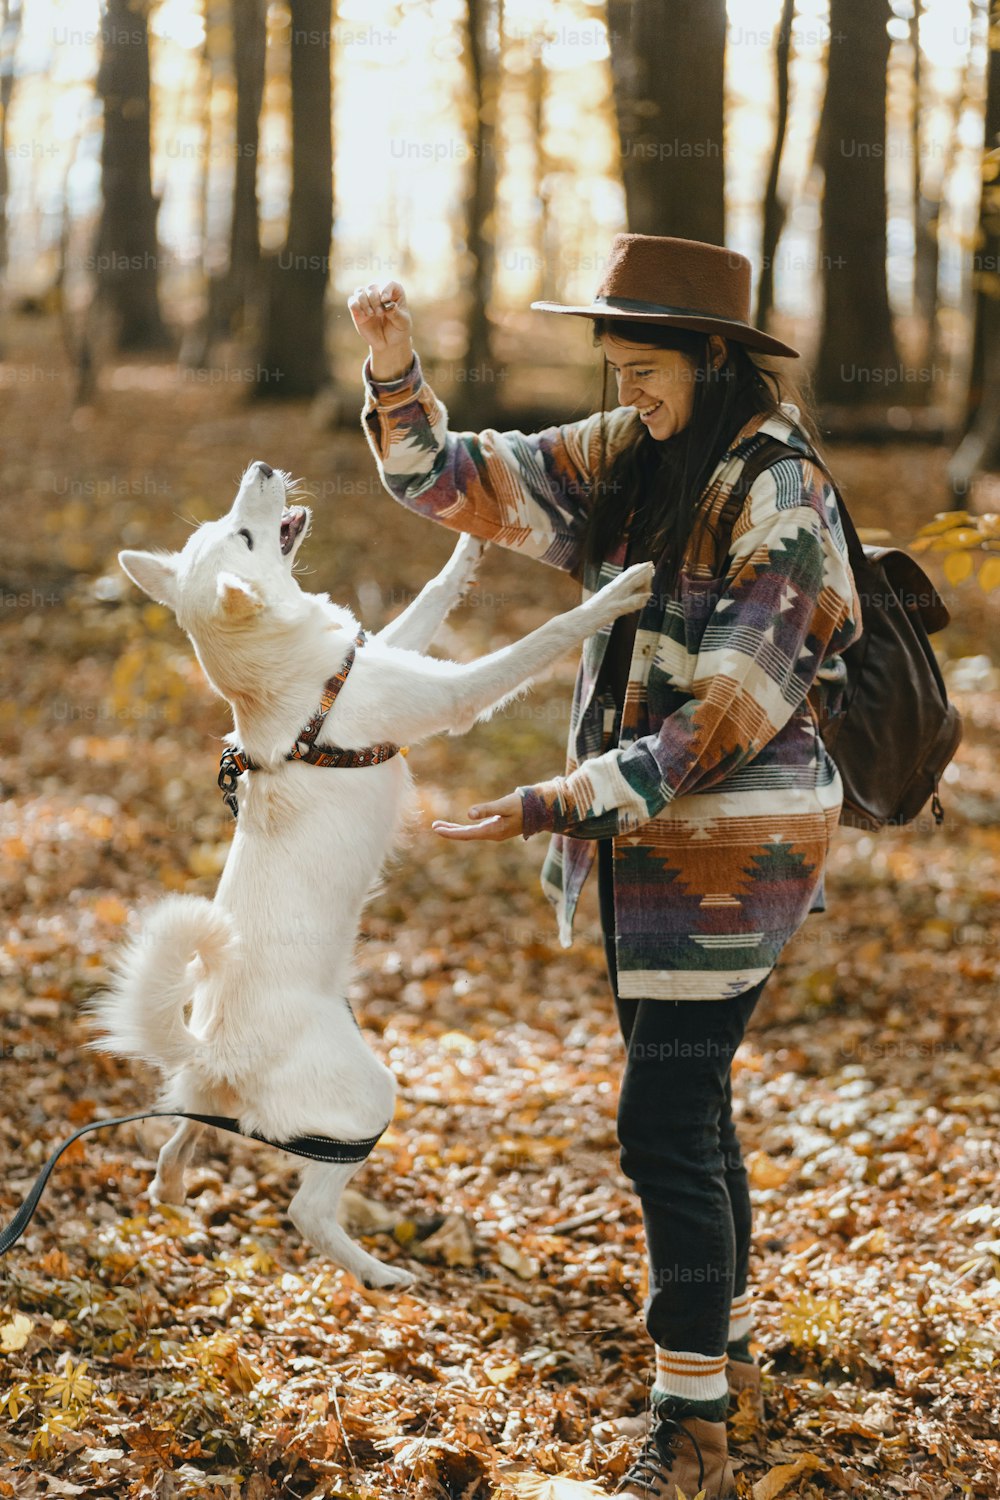 Stylish woman training adorable white dog to jump in sunny autumn woods. Cute swiss shepherd puppy learning with treats. Hipster female with backpack playing with her dog in autumn forest